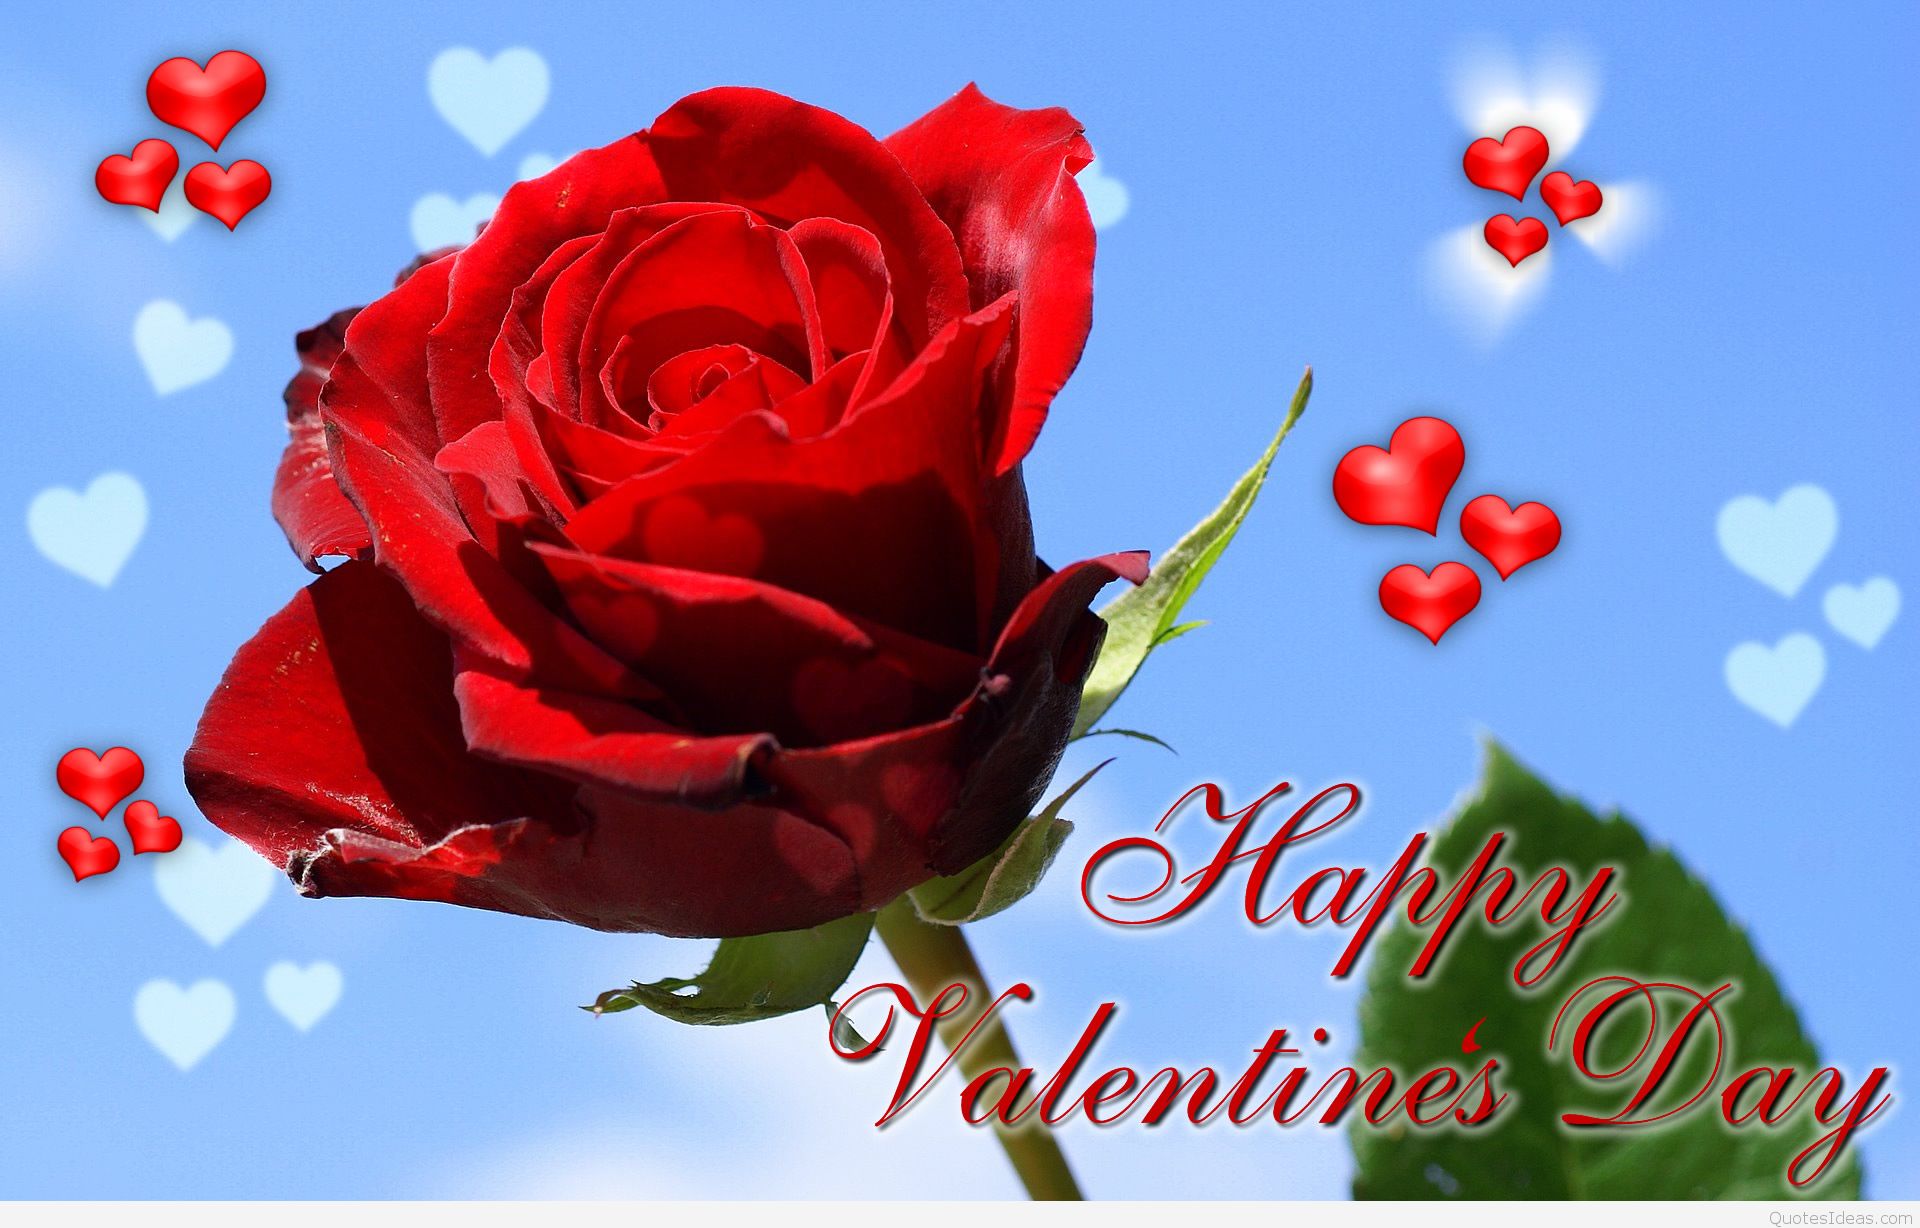 Happy Valentines Day Wallpaper High Quality 0o5w - Romantic Happy Valentine  Day - 1920x1228 Wallpaper 